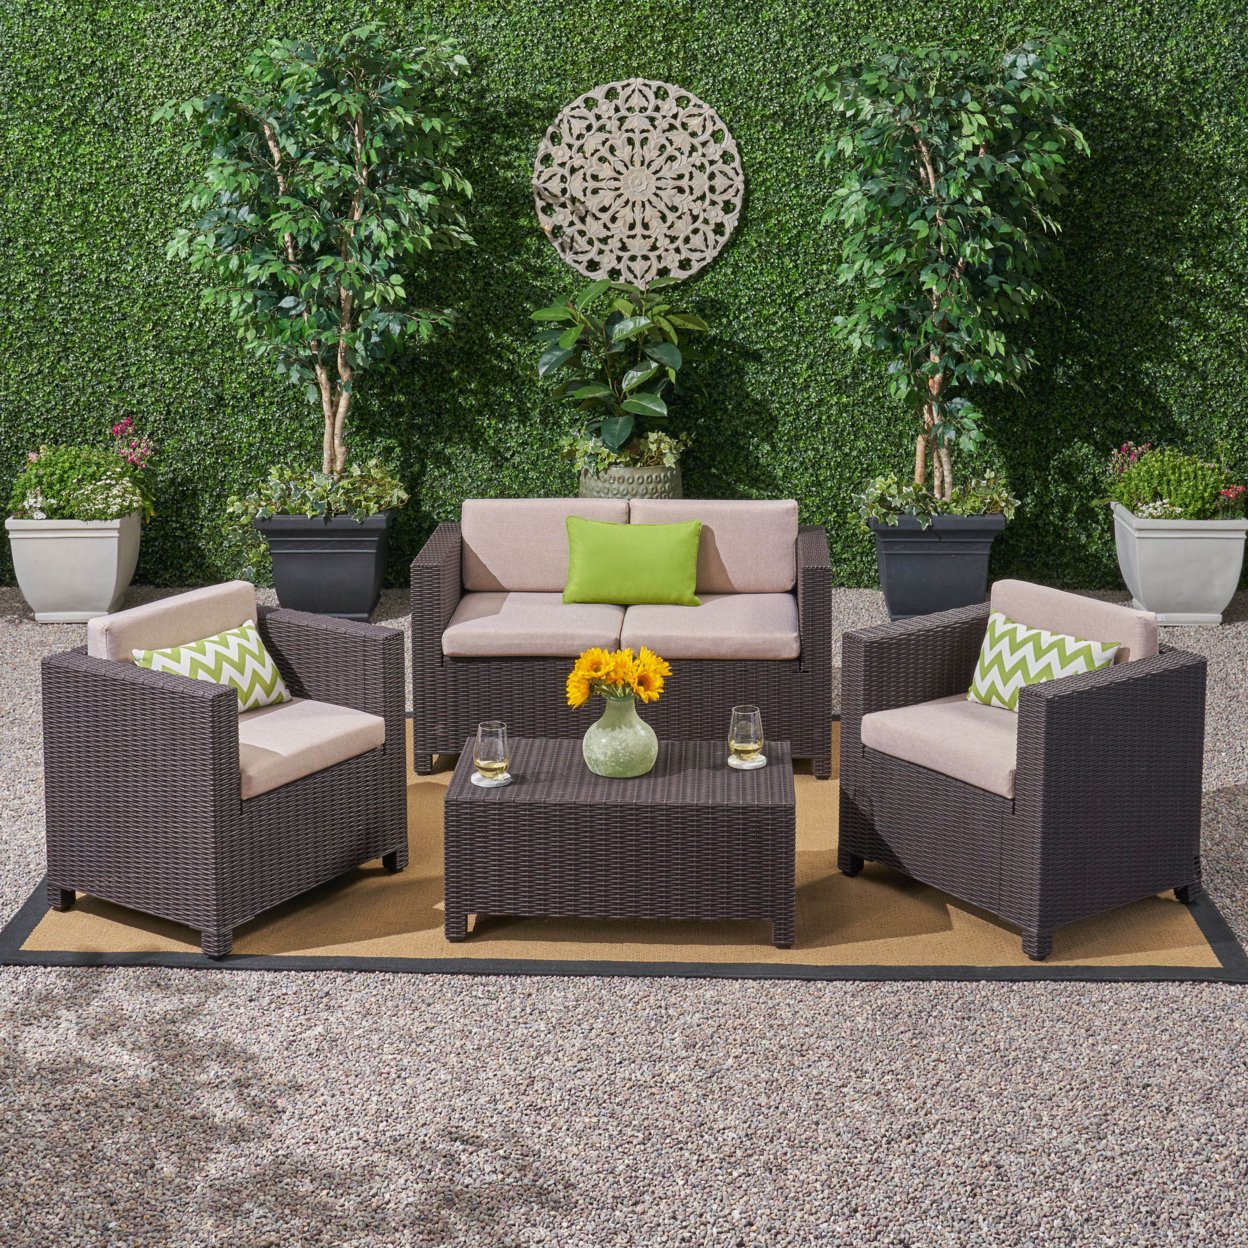 Riley Outdoor All Weather Faux Wicker 4 Seater Chat Set With Cushions - Dark Brown + Beige